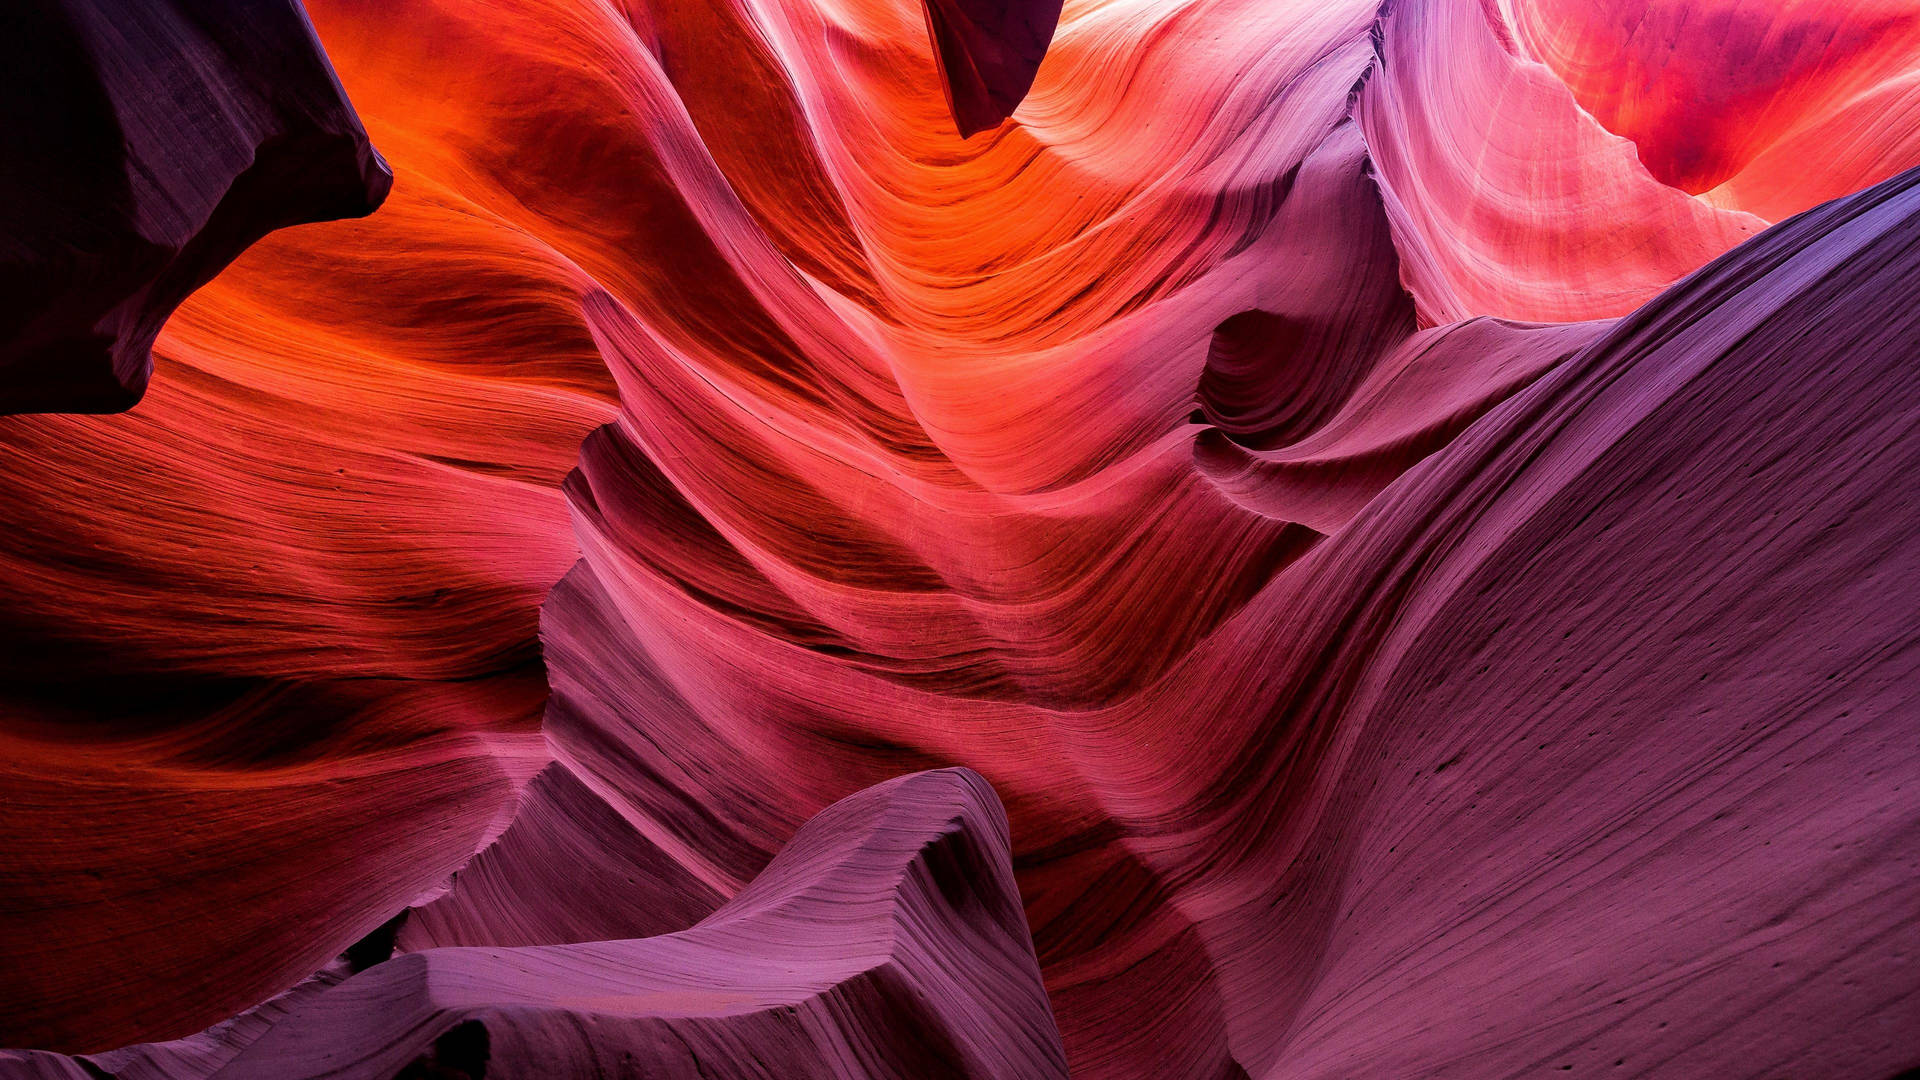 Cool Red Rock Formation Lower Antelope Canyon Wallpaper